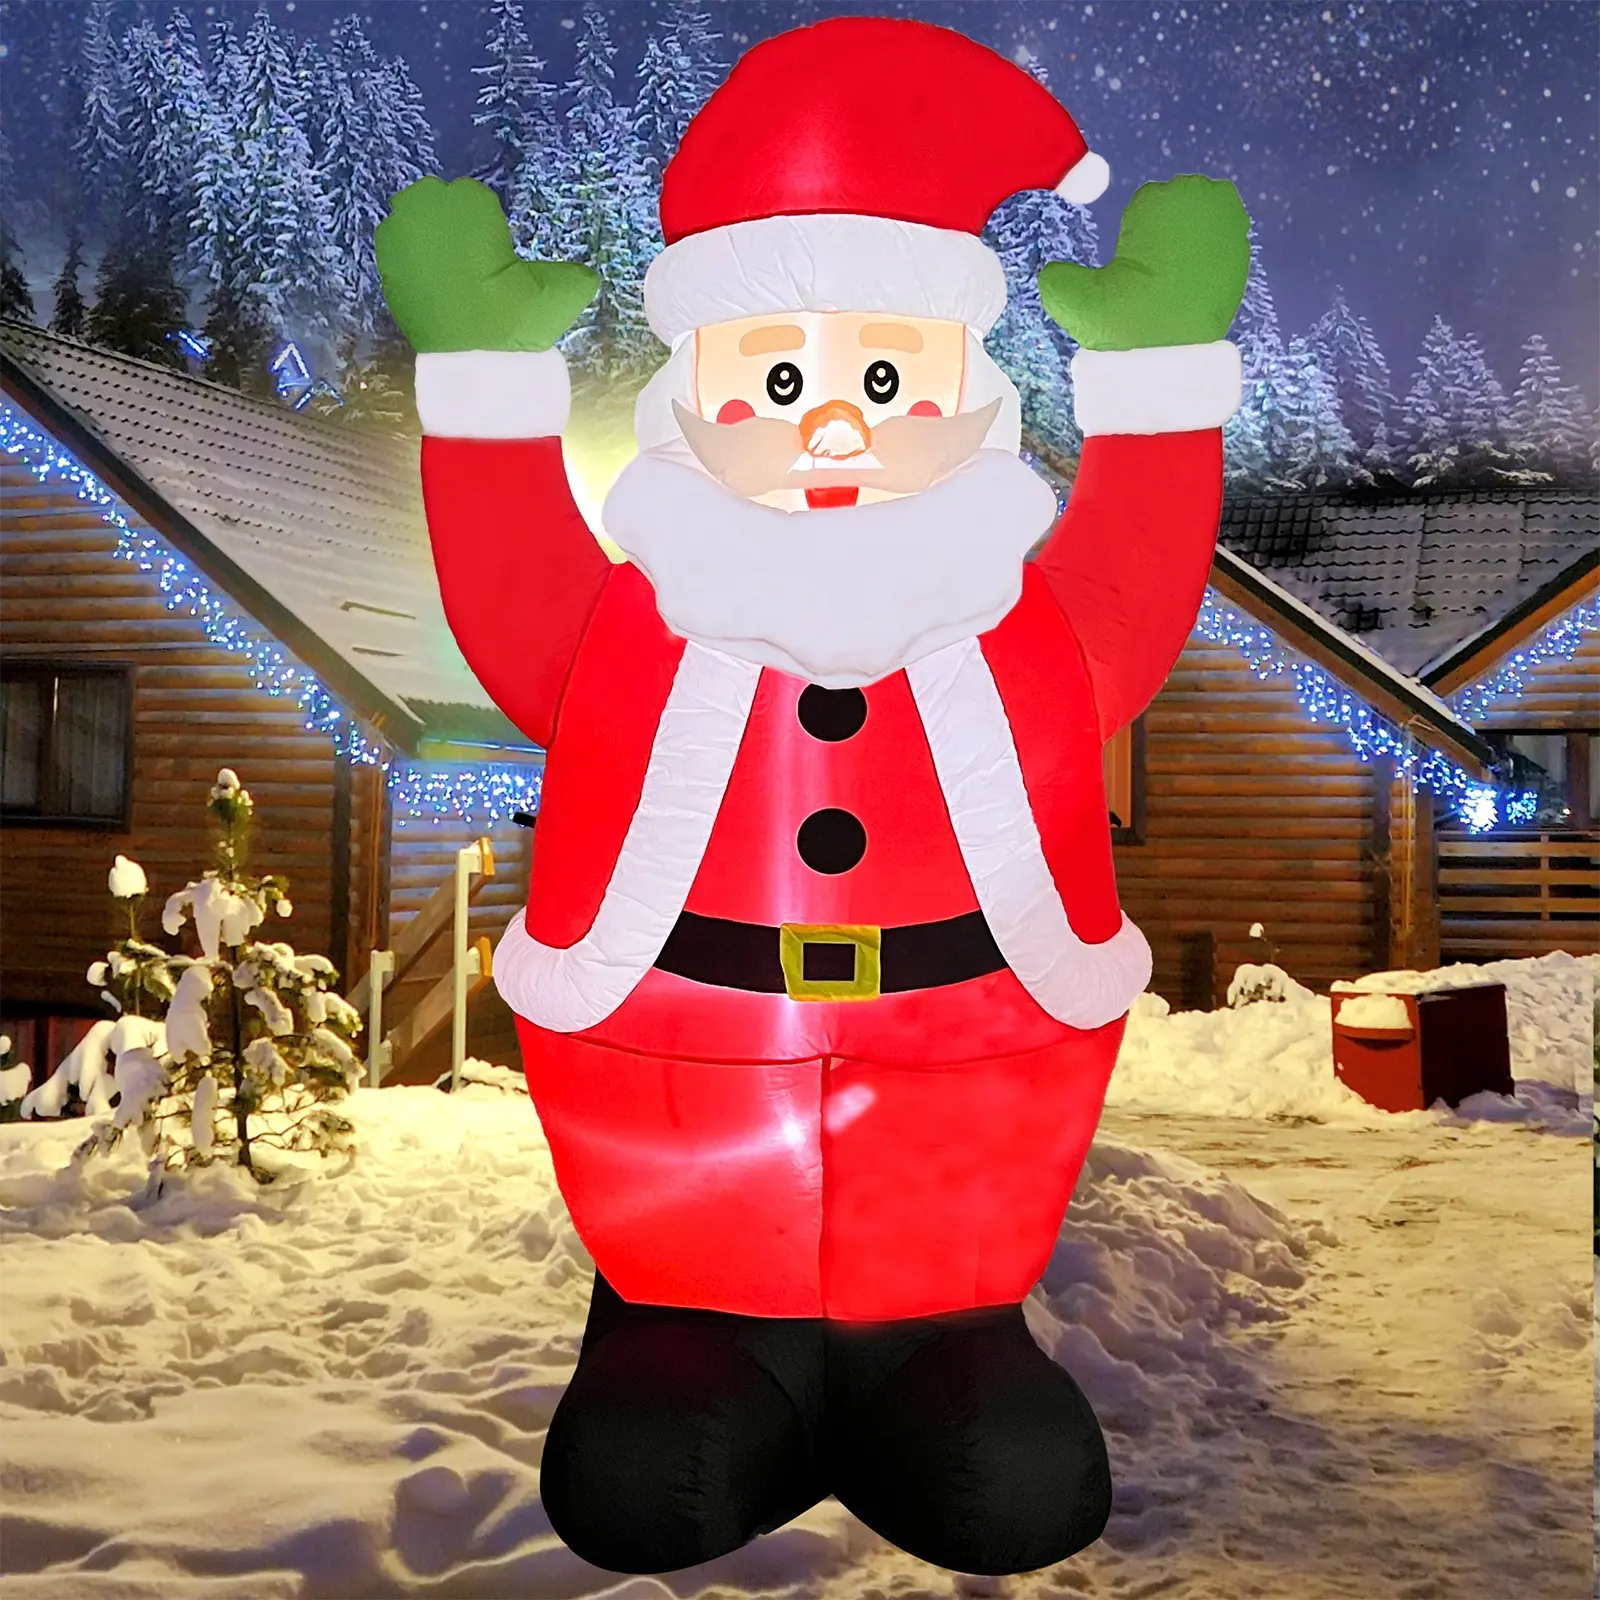 8FT Santa Claus Quick Inflatable Christmas Decoration with LED Lights Festive Outdoor Decorations for the Christmas Season